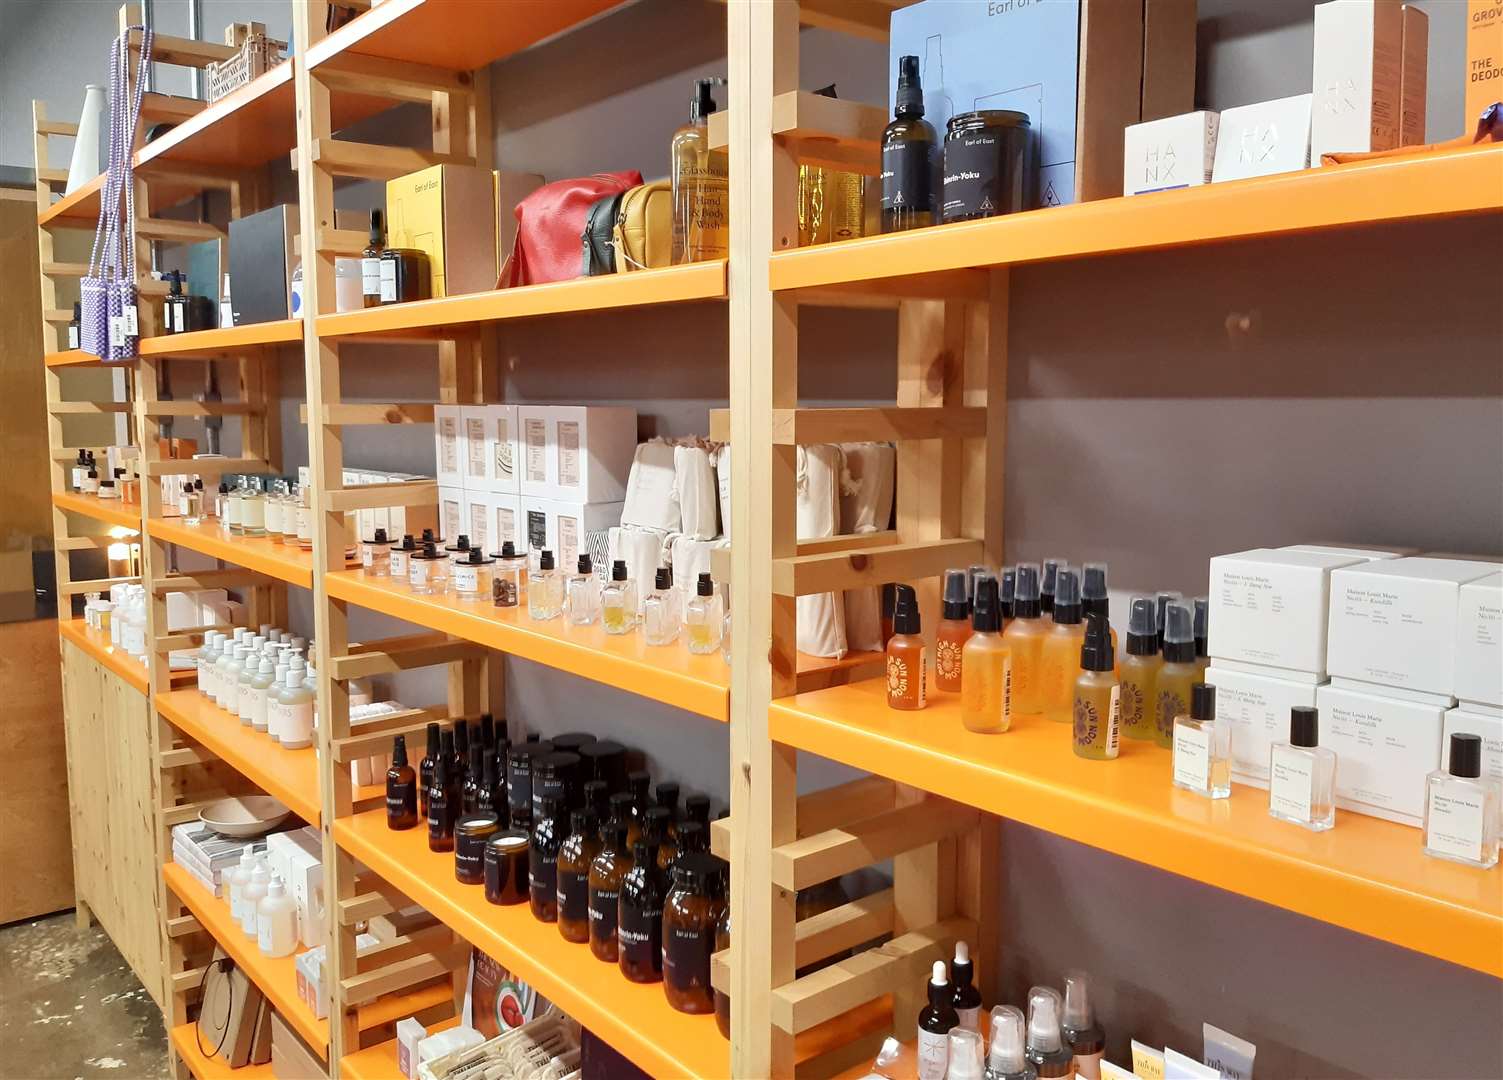 Beauty and wellness products at Earl of East